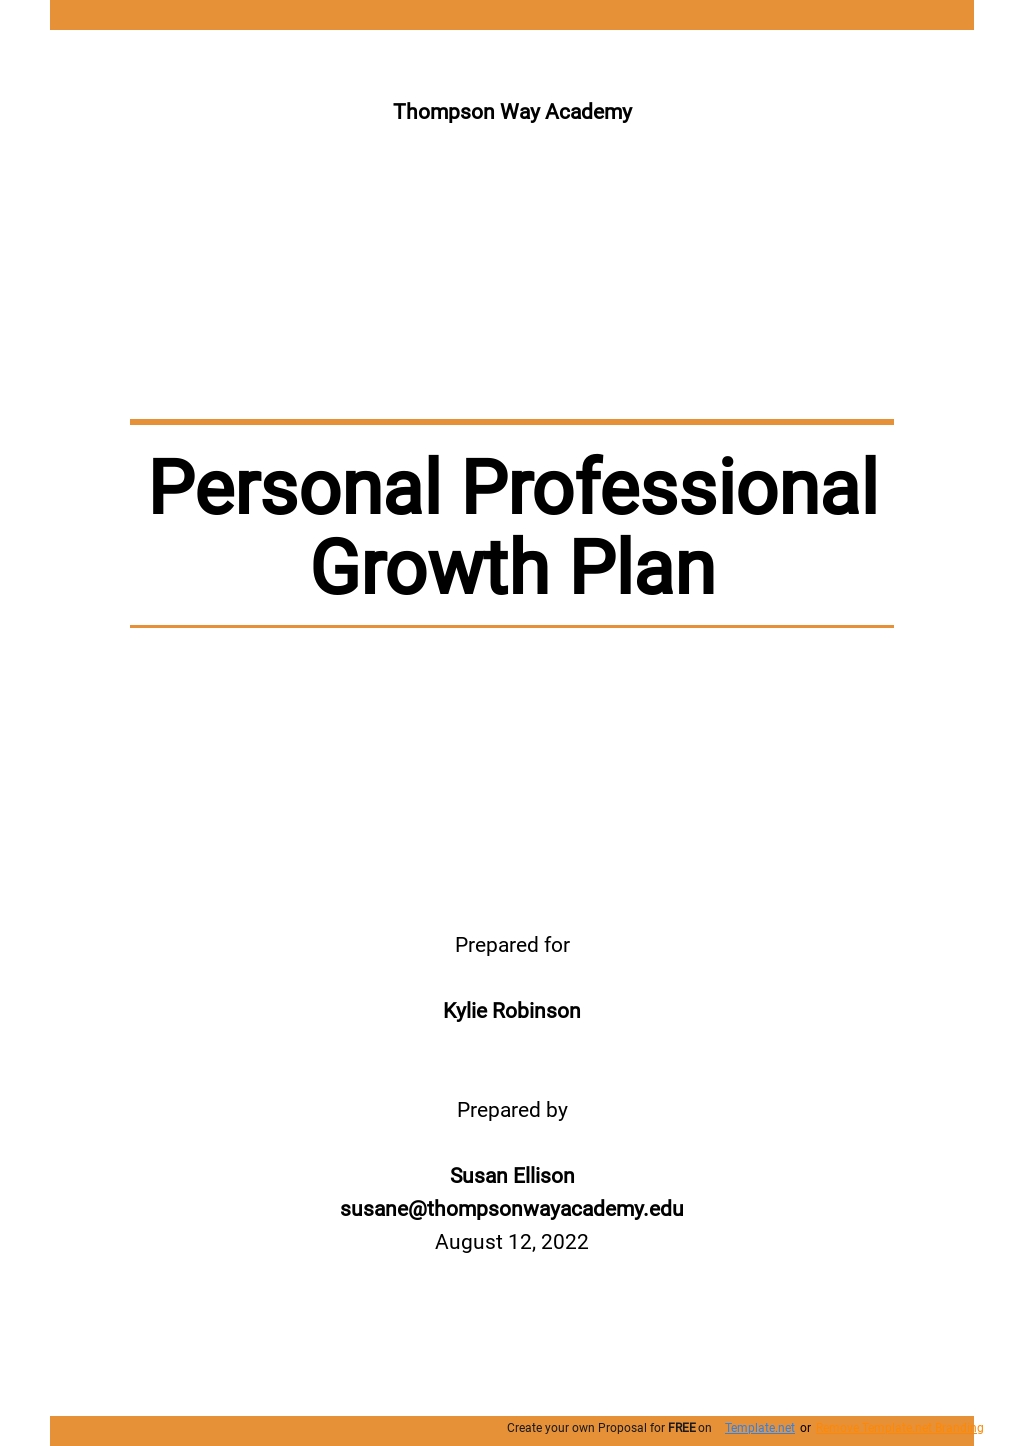 personal growth plan for business